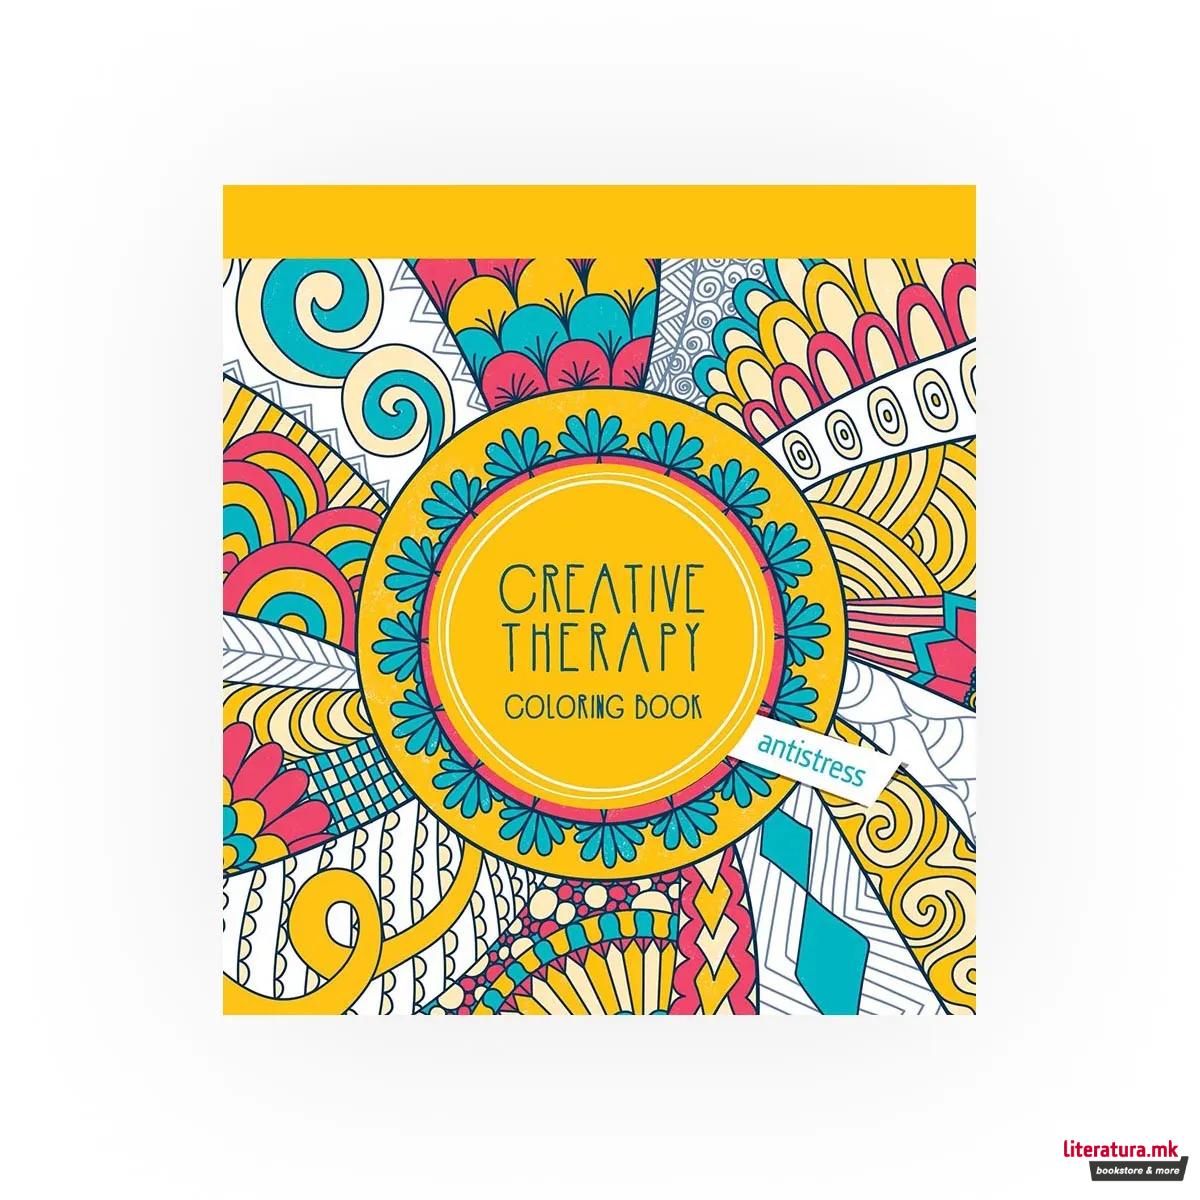 Creative Therapy Coloring Book - Antistress 